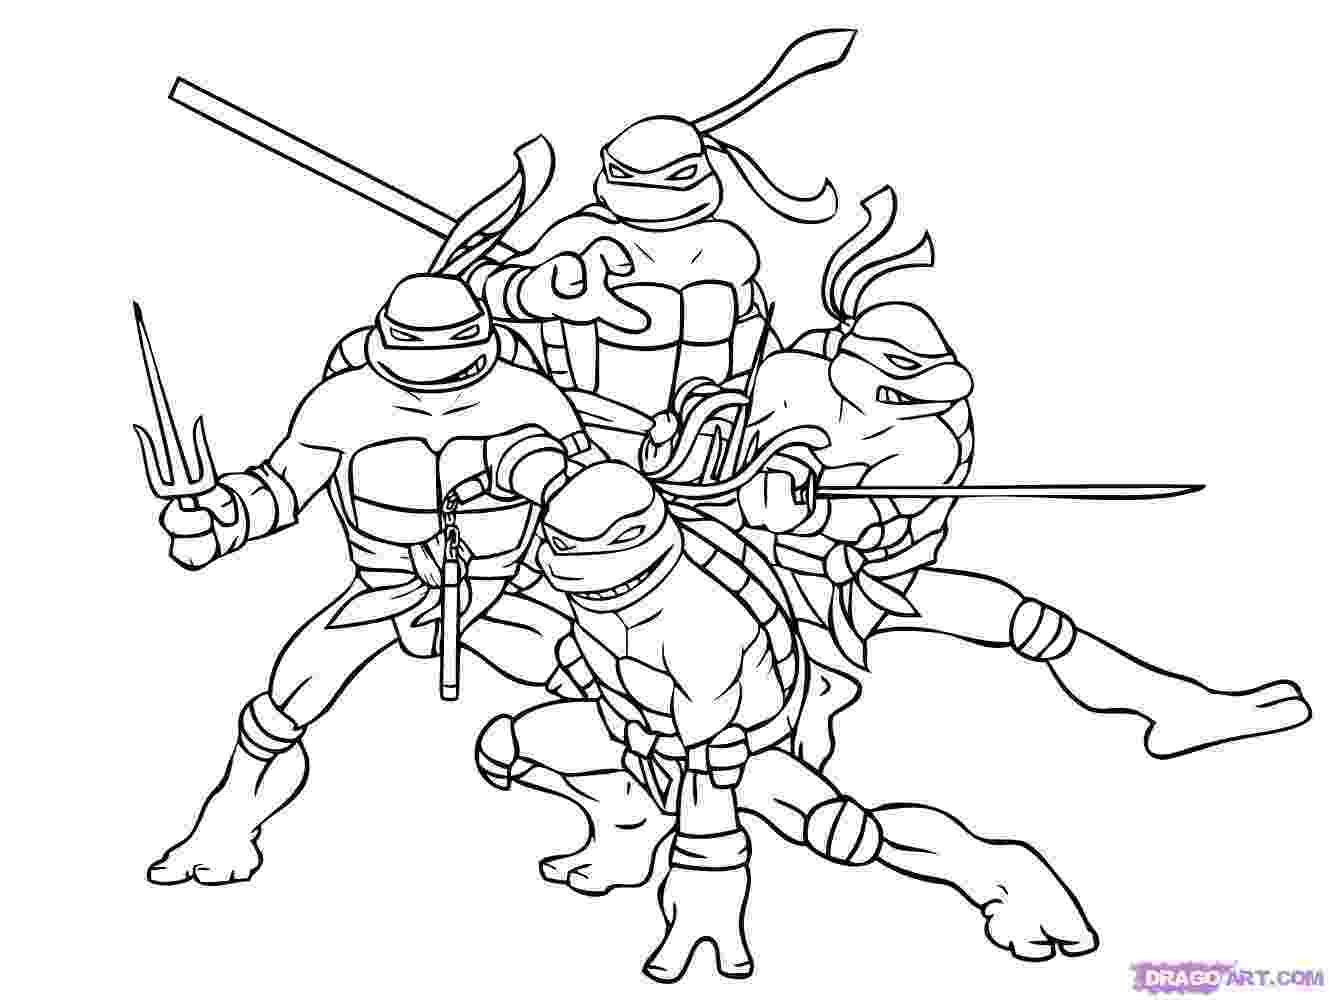 ninja turtles coloring pages to print coloring pages printable ninja turtles coloring pages print pages coloring to ninja turtles 